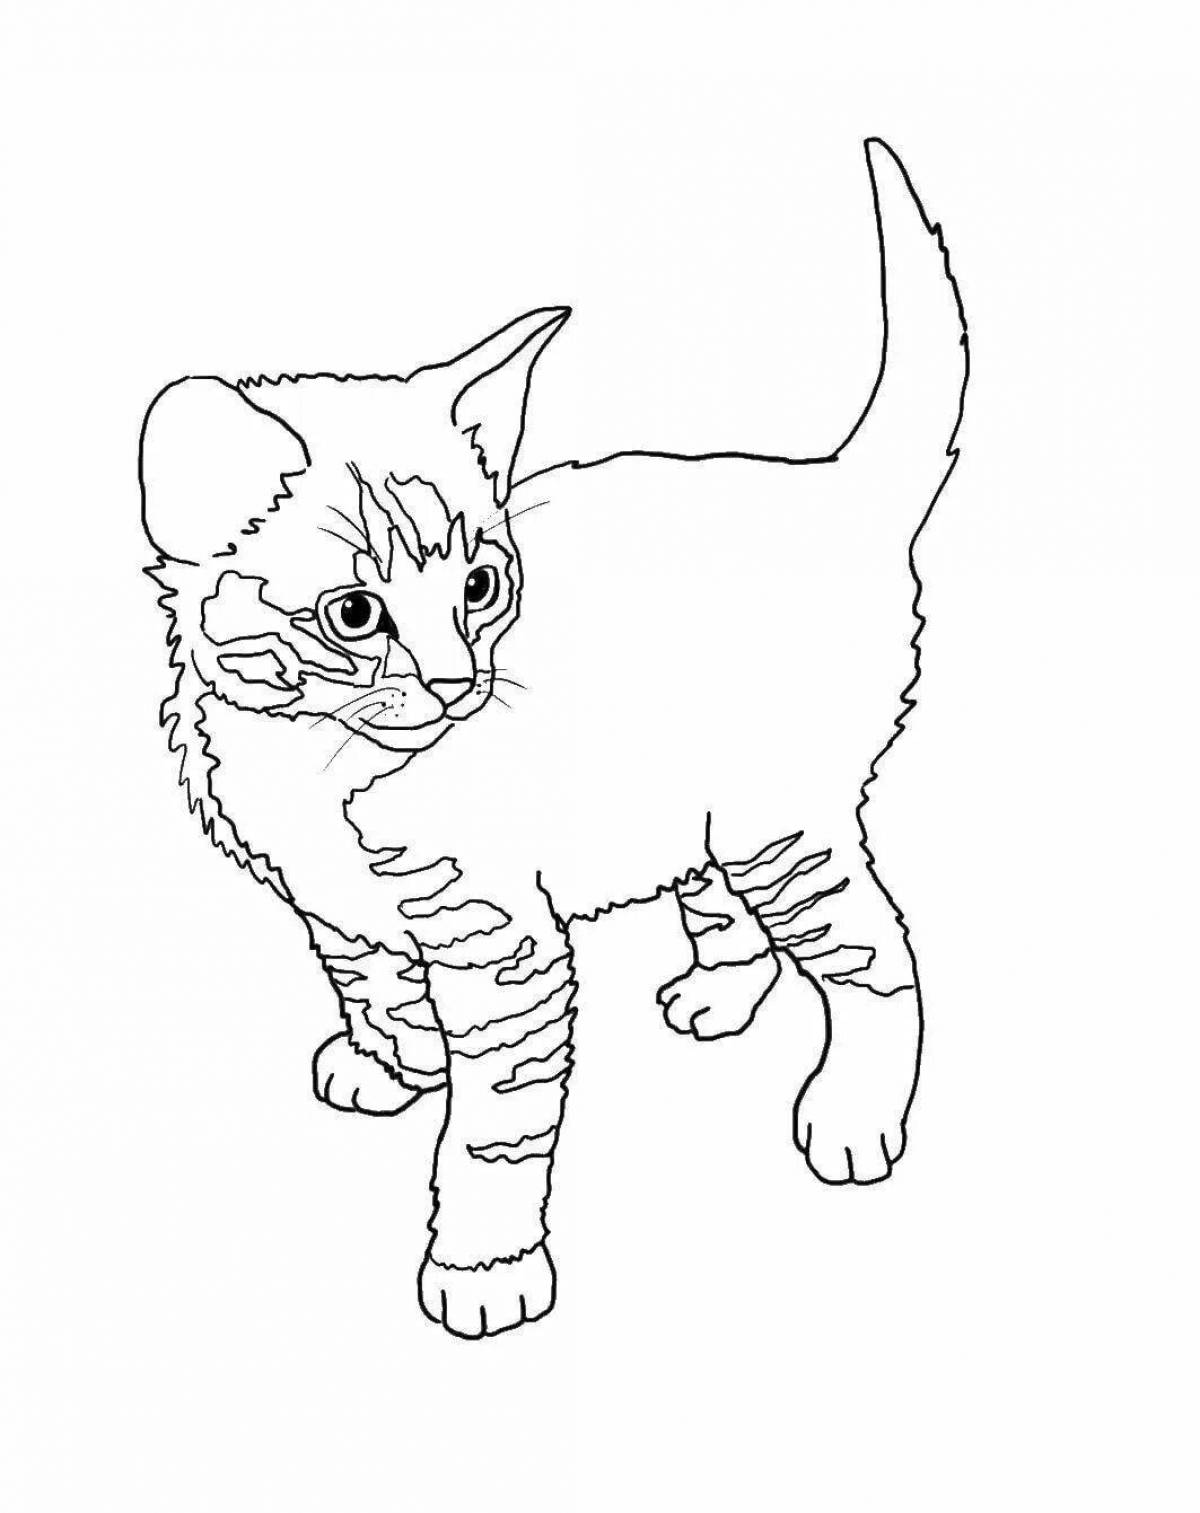 Little kitty coloring book